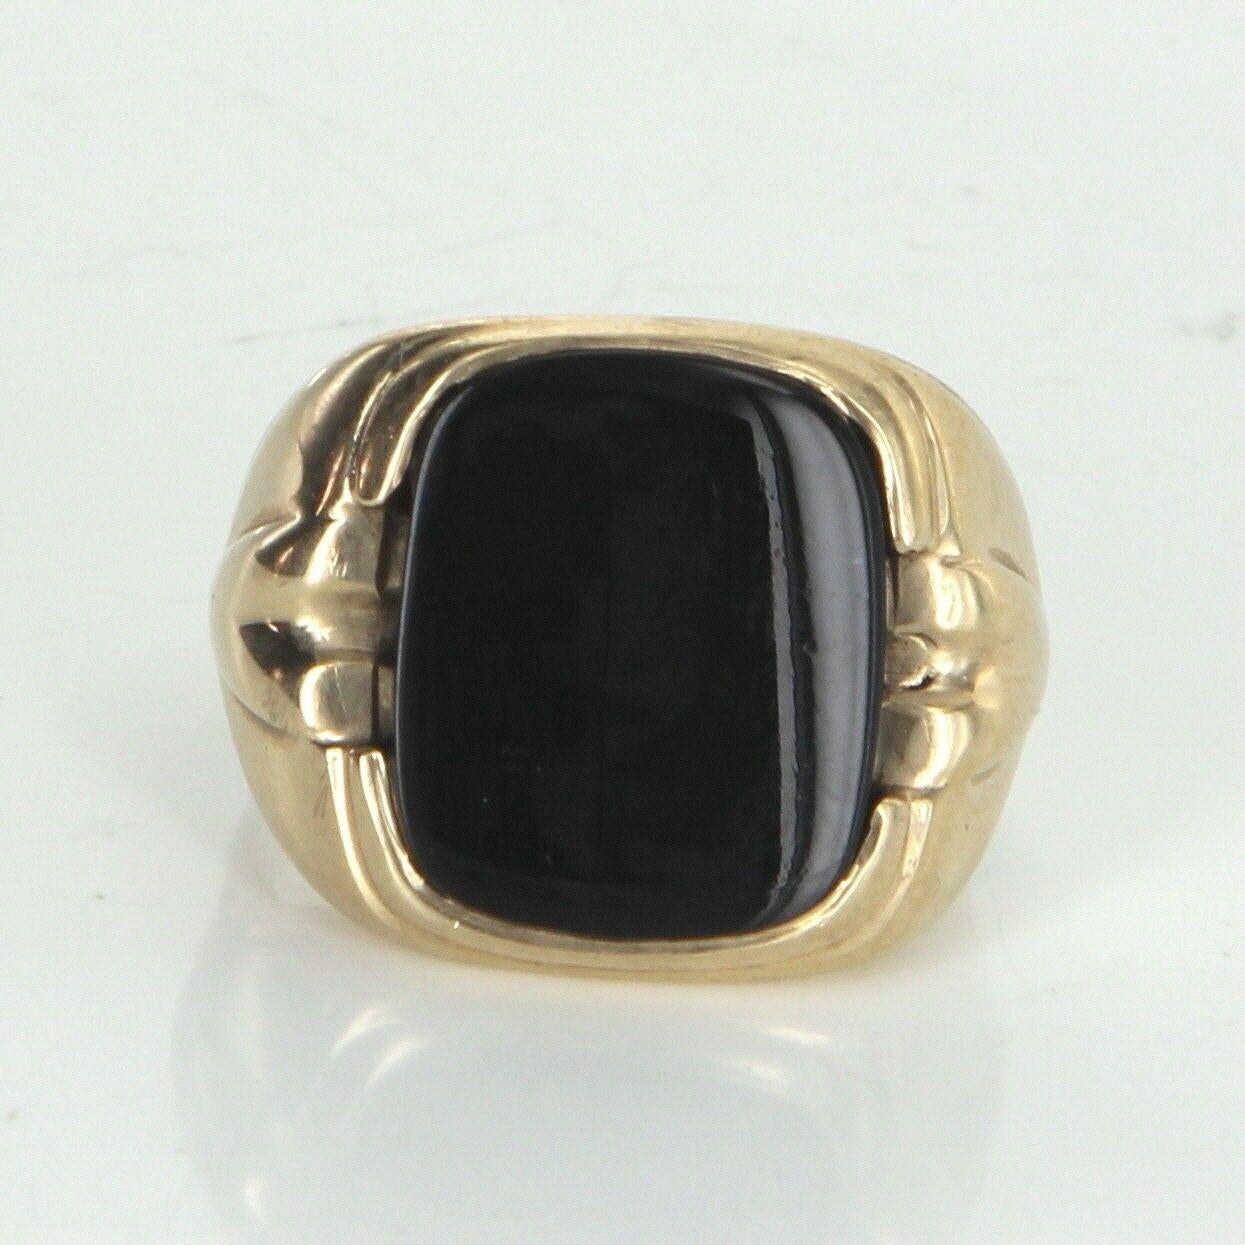 Elegant men's vintage cocktail ring, crafted in 10 karat yellow gold. 

Onyx measures 16mm x 13.5mm. The onyx is in excellent condition and free of cracks or chips. 

The ring is in excellent condition. 

Particulars:

Weight: 6.6 grams

Stones: 